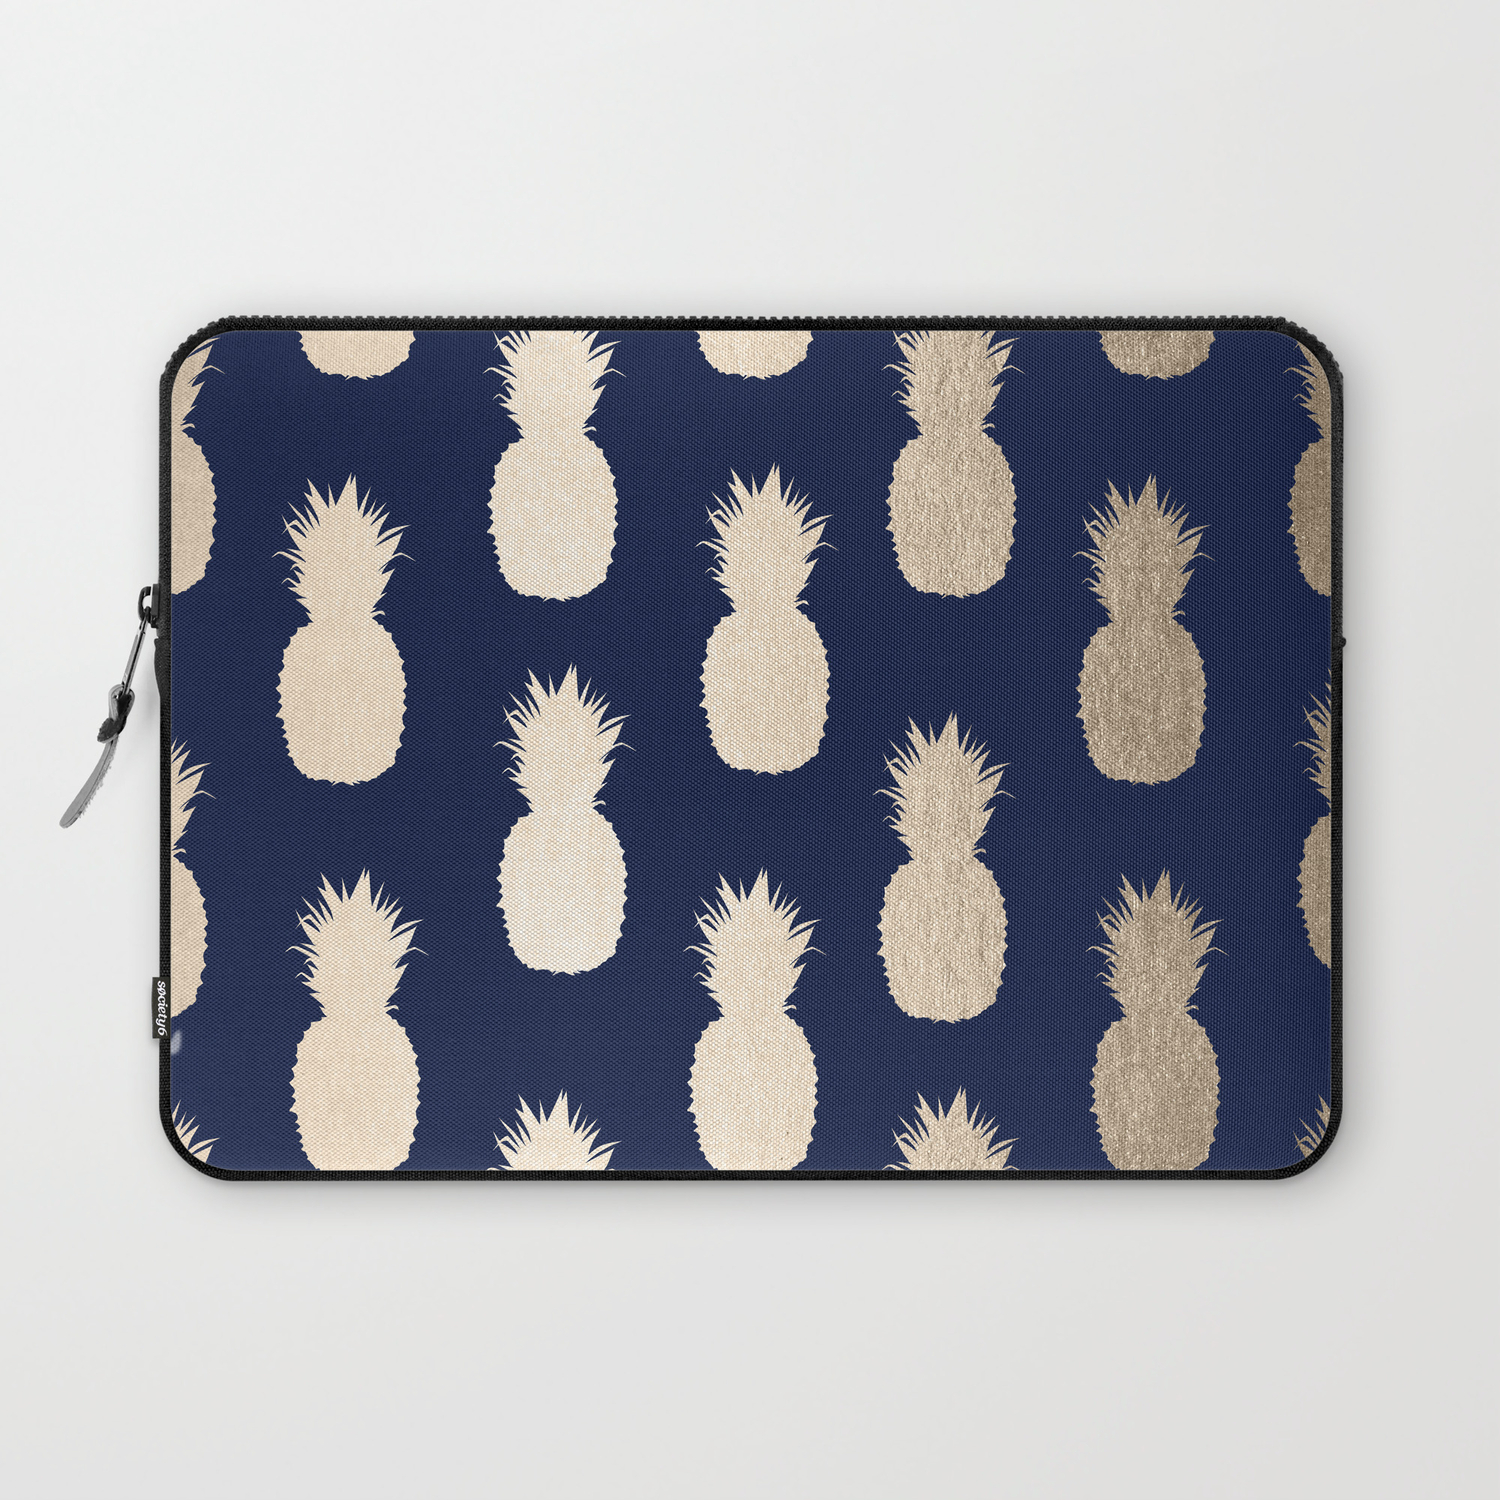 Xxh 13Inch Laptop Sleeve Case Pineapple Neoprene Cover Bag Compatible MacBook Air/Pro